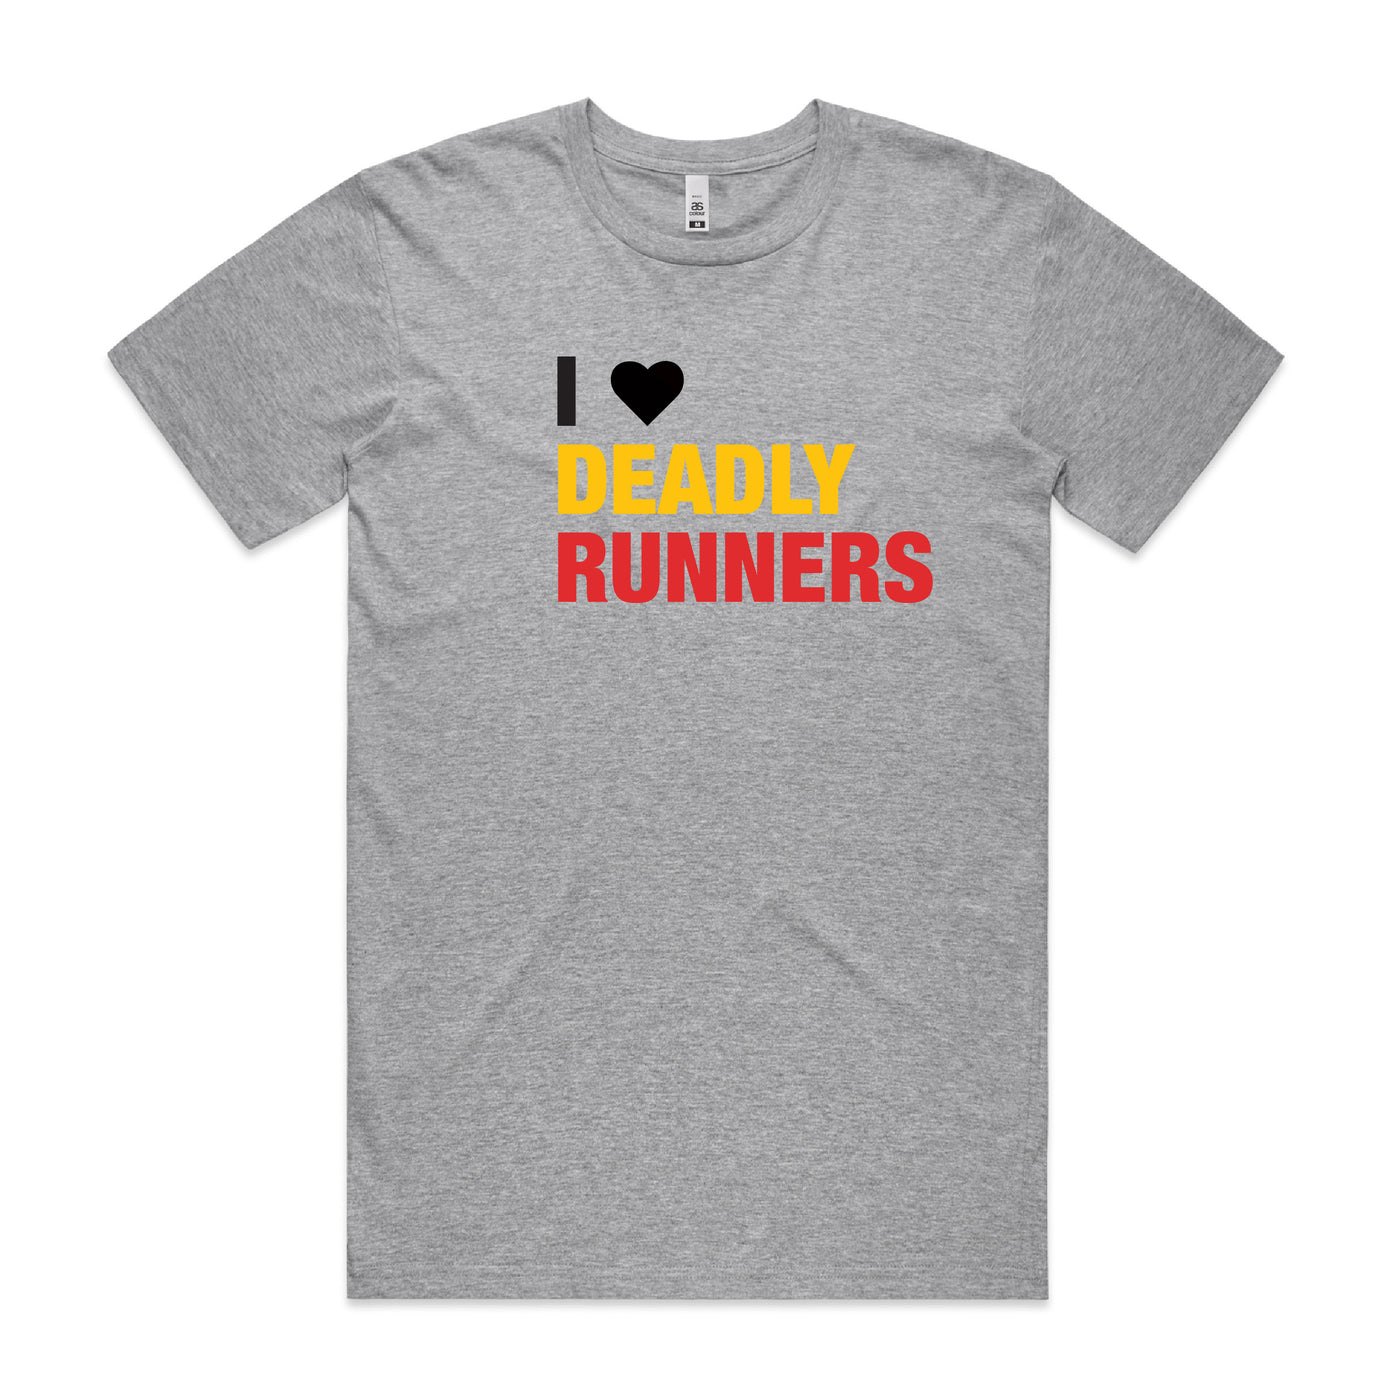 Front view unisex grey tee with I heart Deadly Runners design